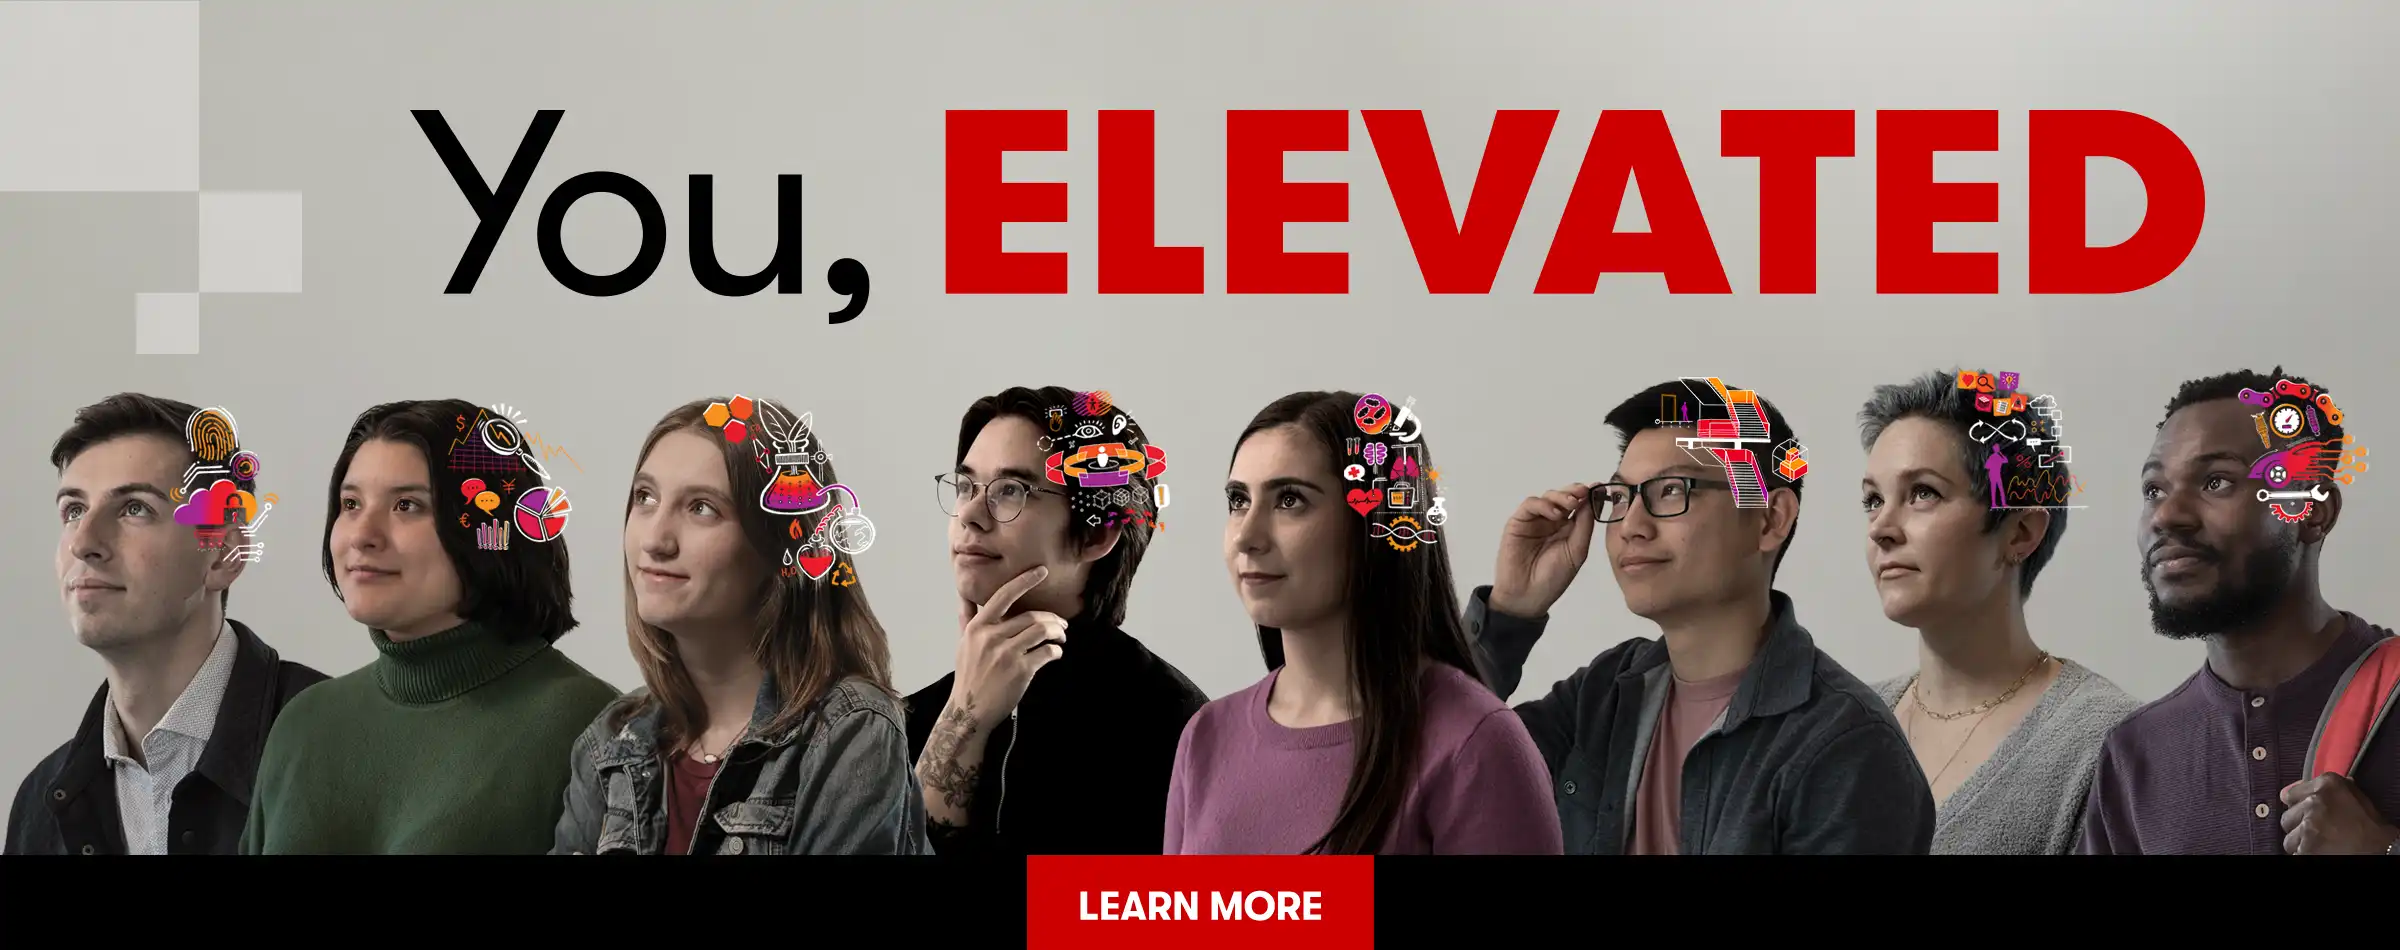 You, Elevated | Eight students in a 3/4 view looking up and to the left with line art illustrations overlaid on their heads | Learn More